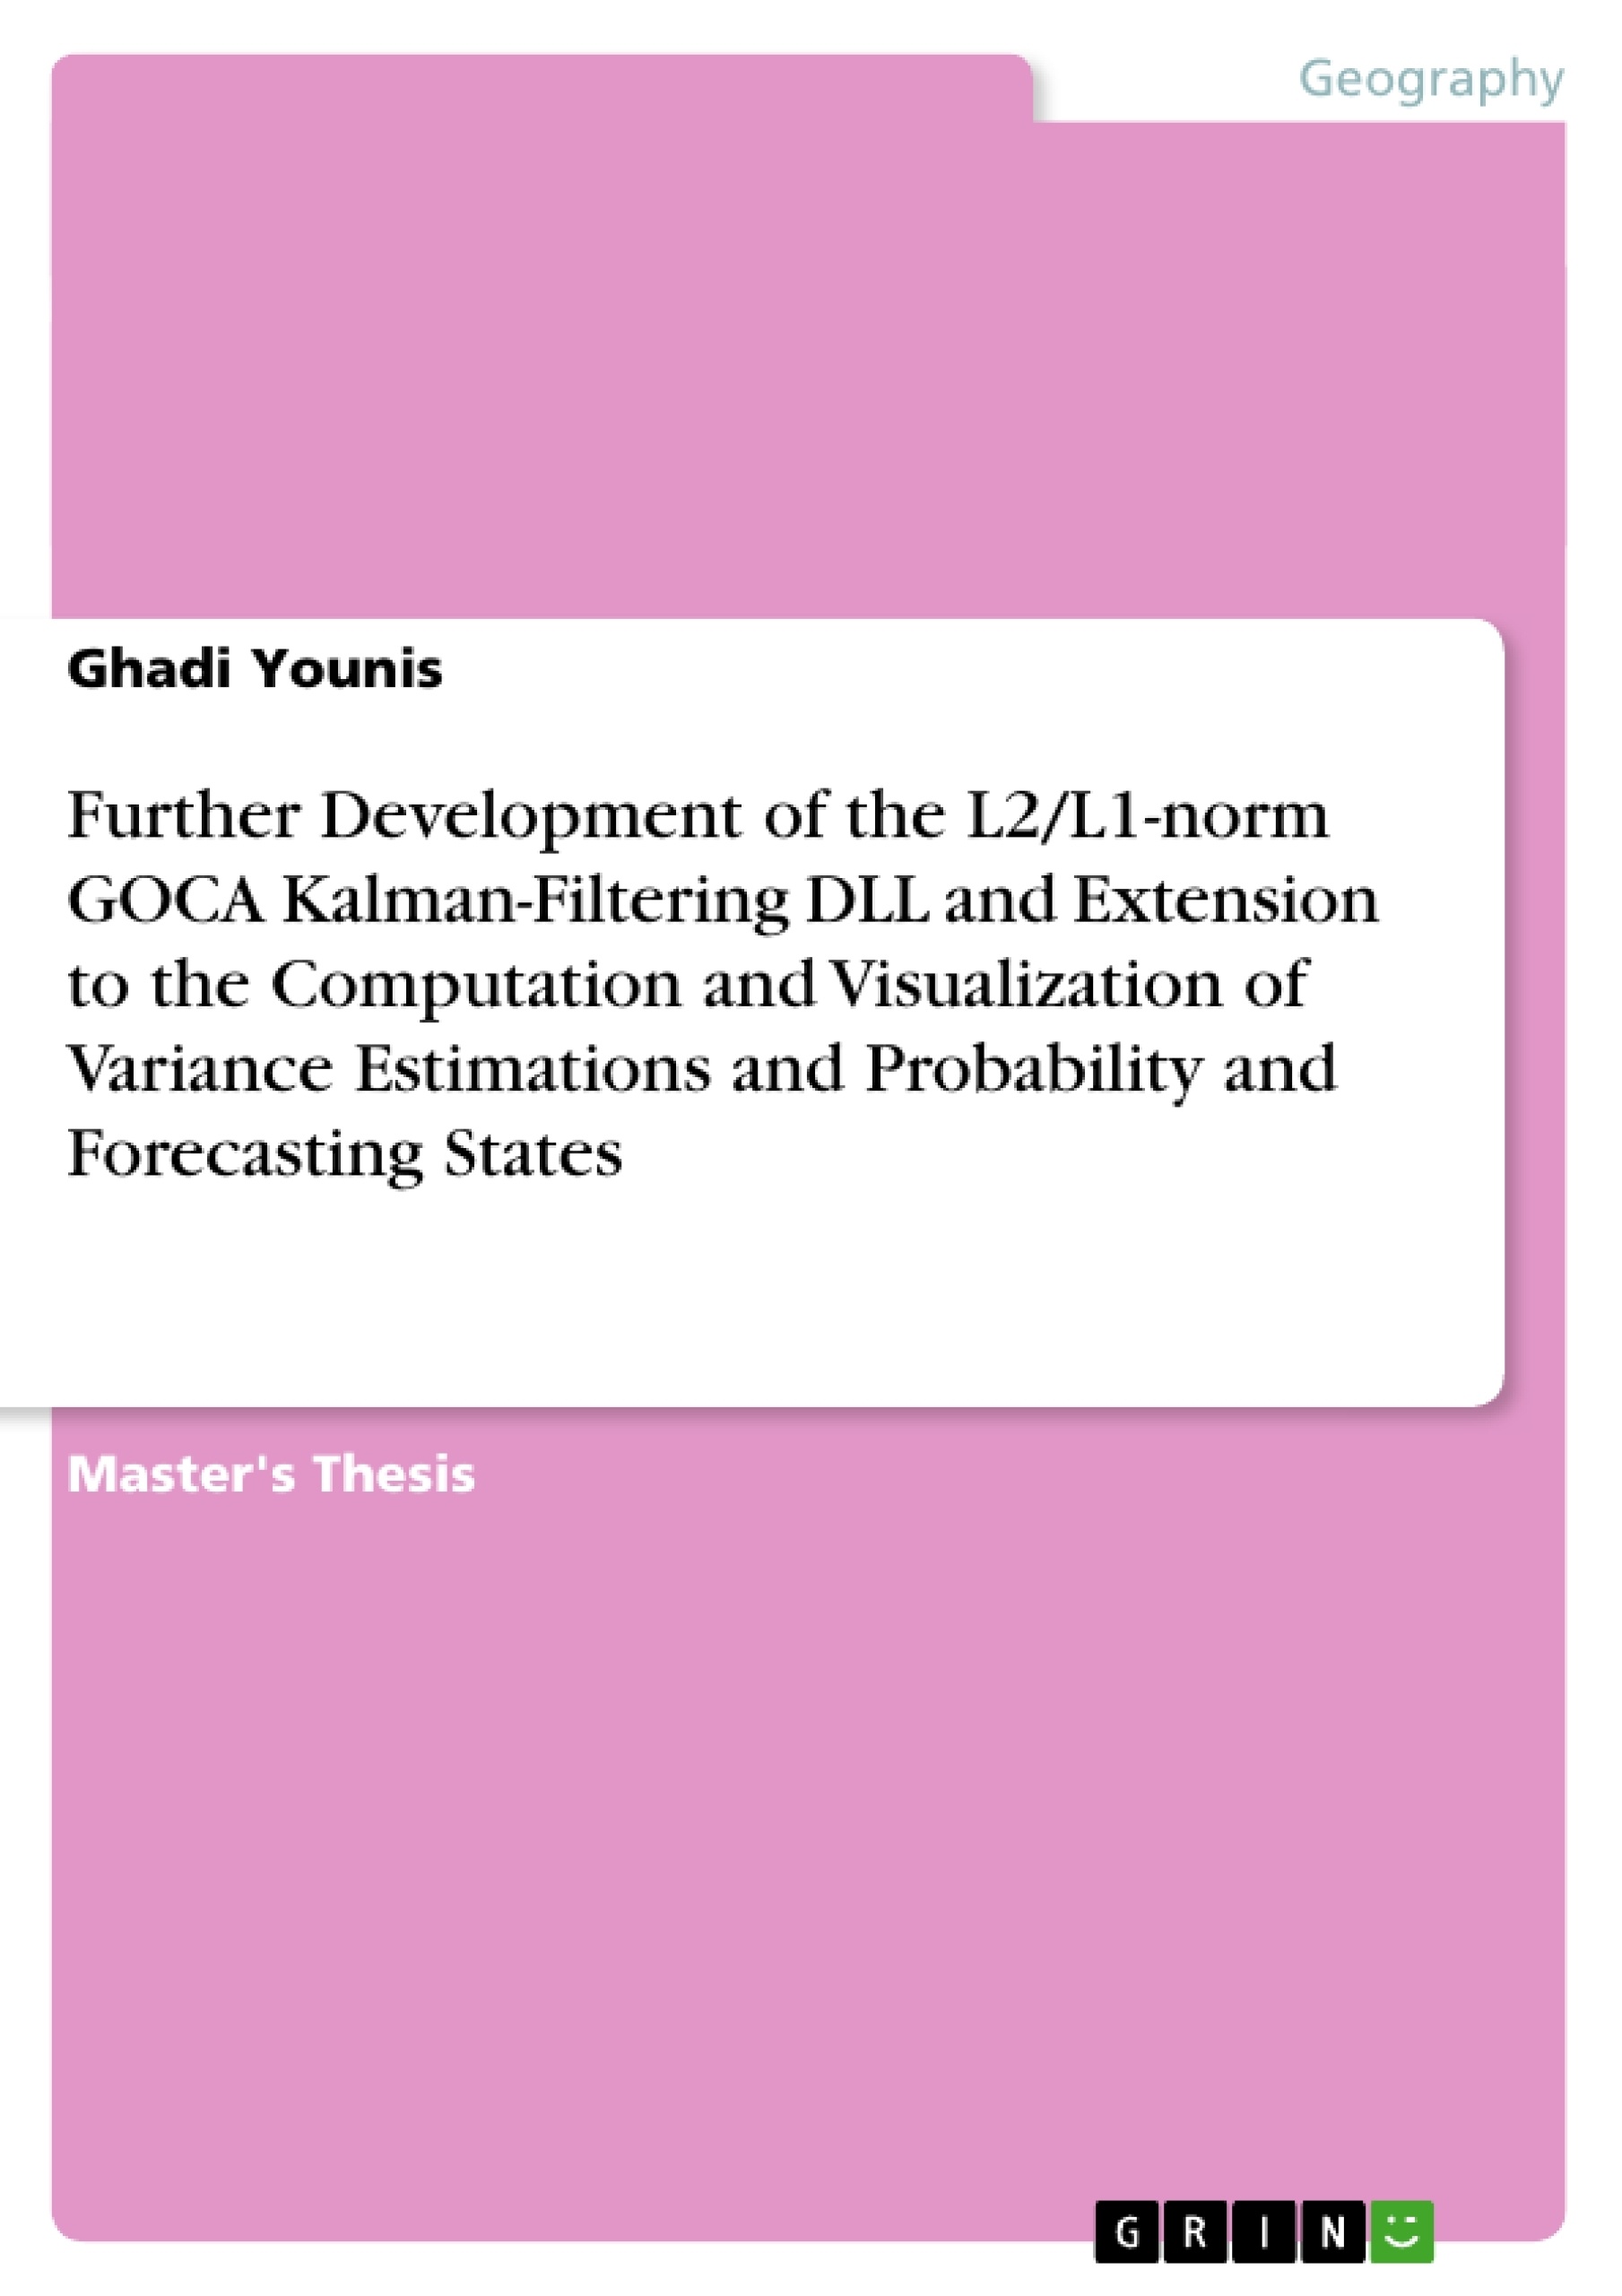 Título: Further Development of the L2/L1-norm GOCA Kalman-Filtering DLL and Extension to the Computation and Visualization of Variance Estimations and Probability and Forecasting States